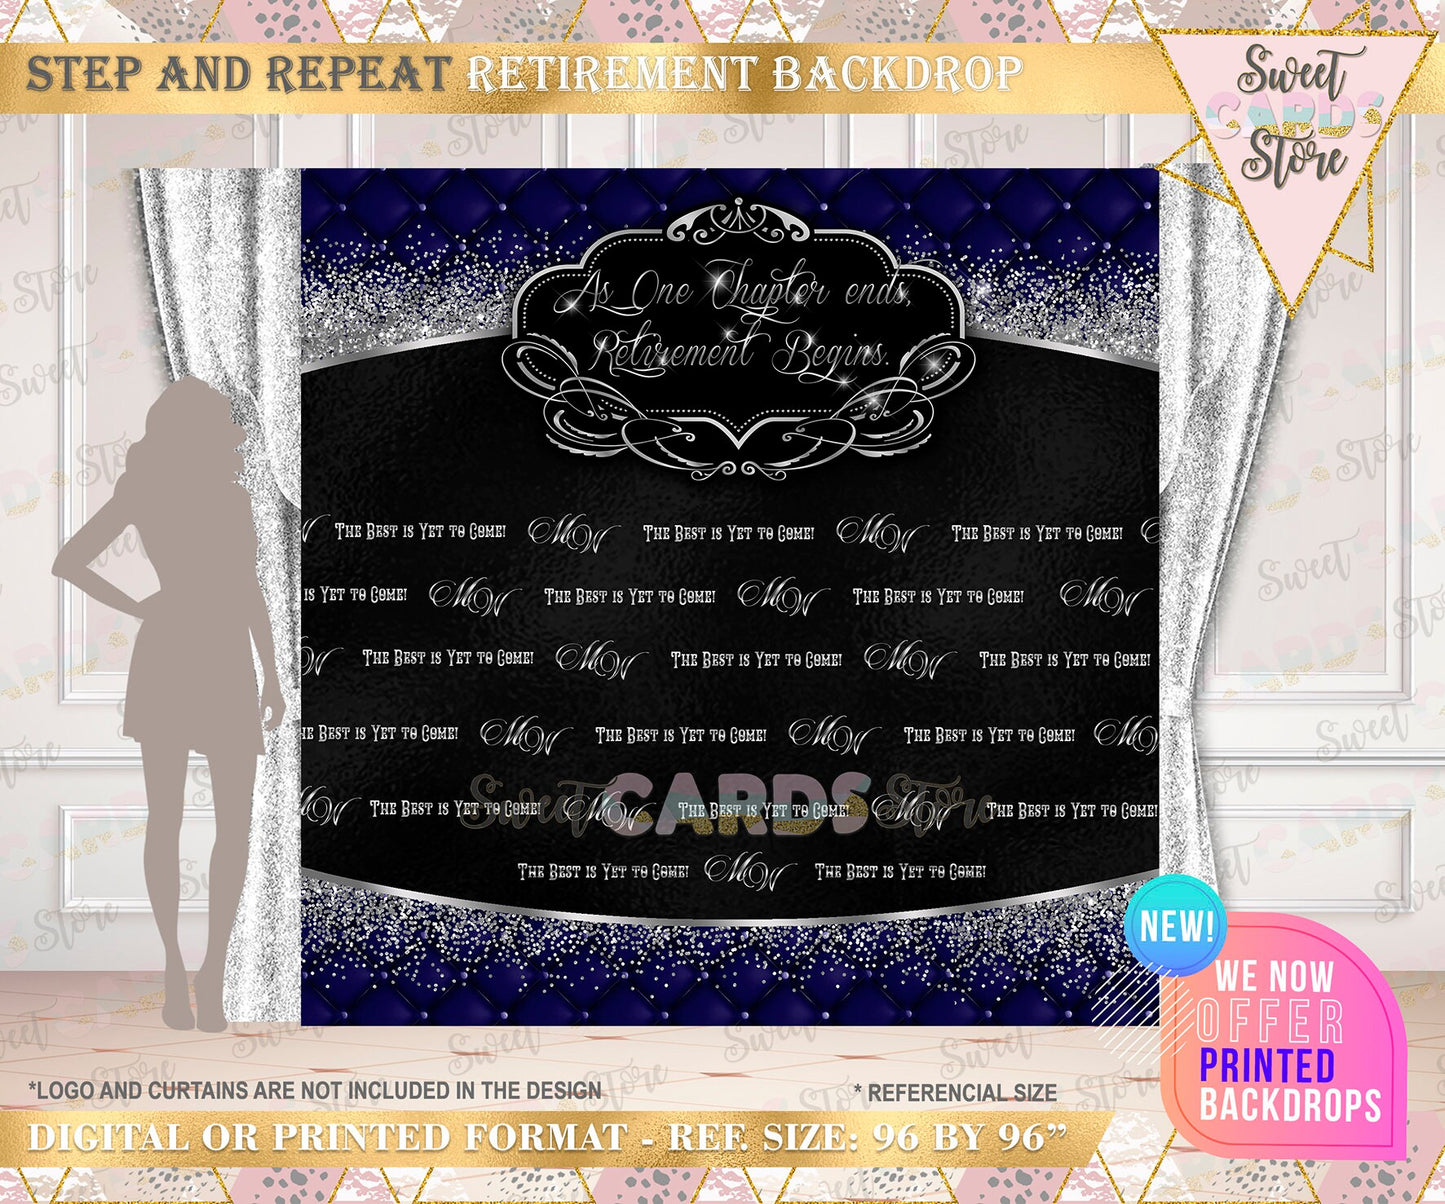 Retirement step and repeat backdrop, Wedding step and repeat printed or digital backdrop, wedding backdrop decor, retirement backdrop